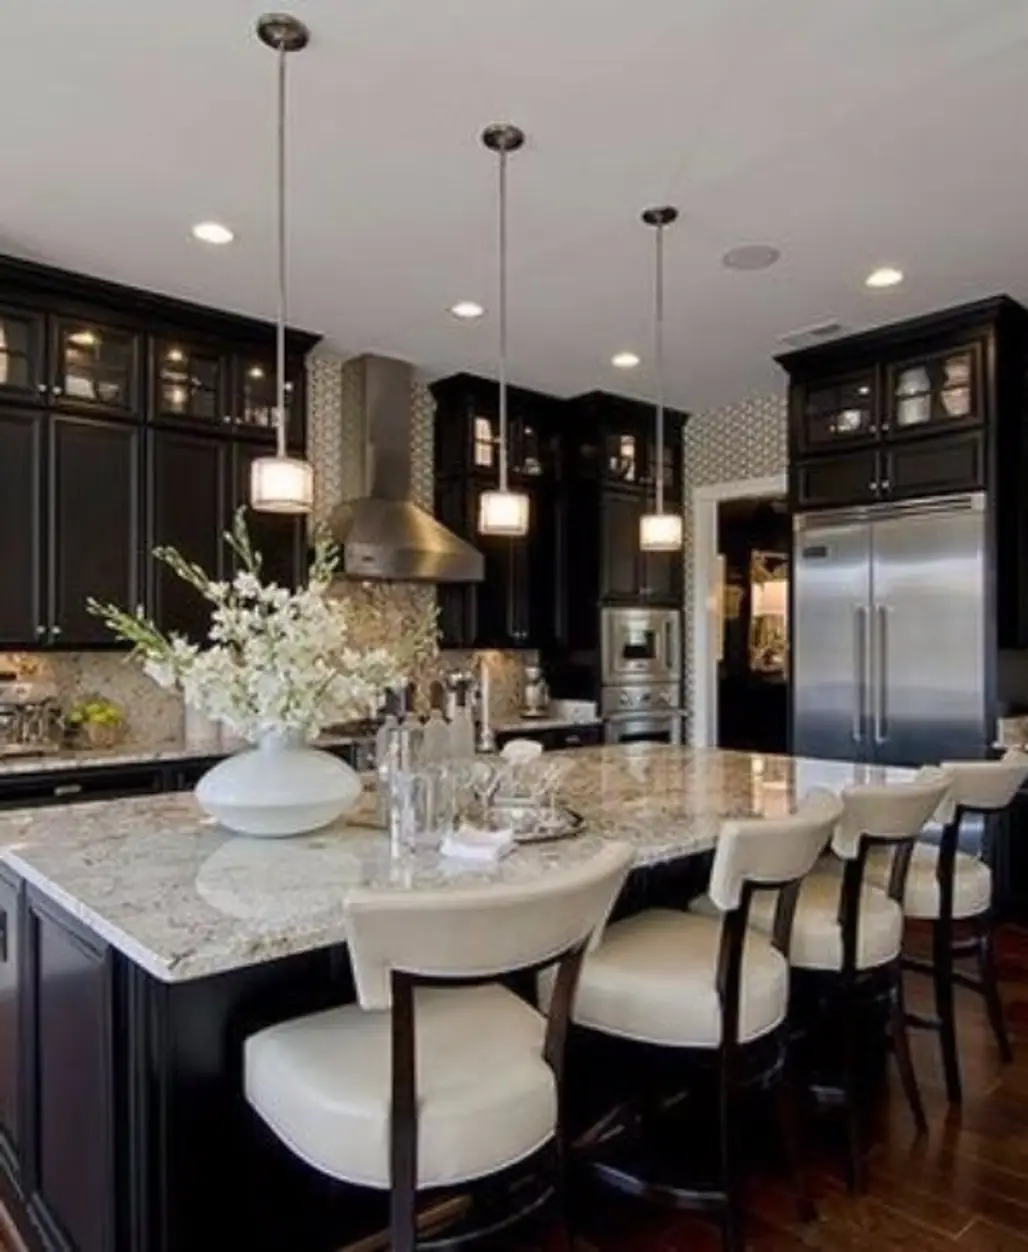 Black Cabinets with White Countertops